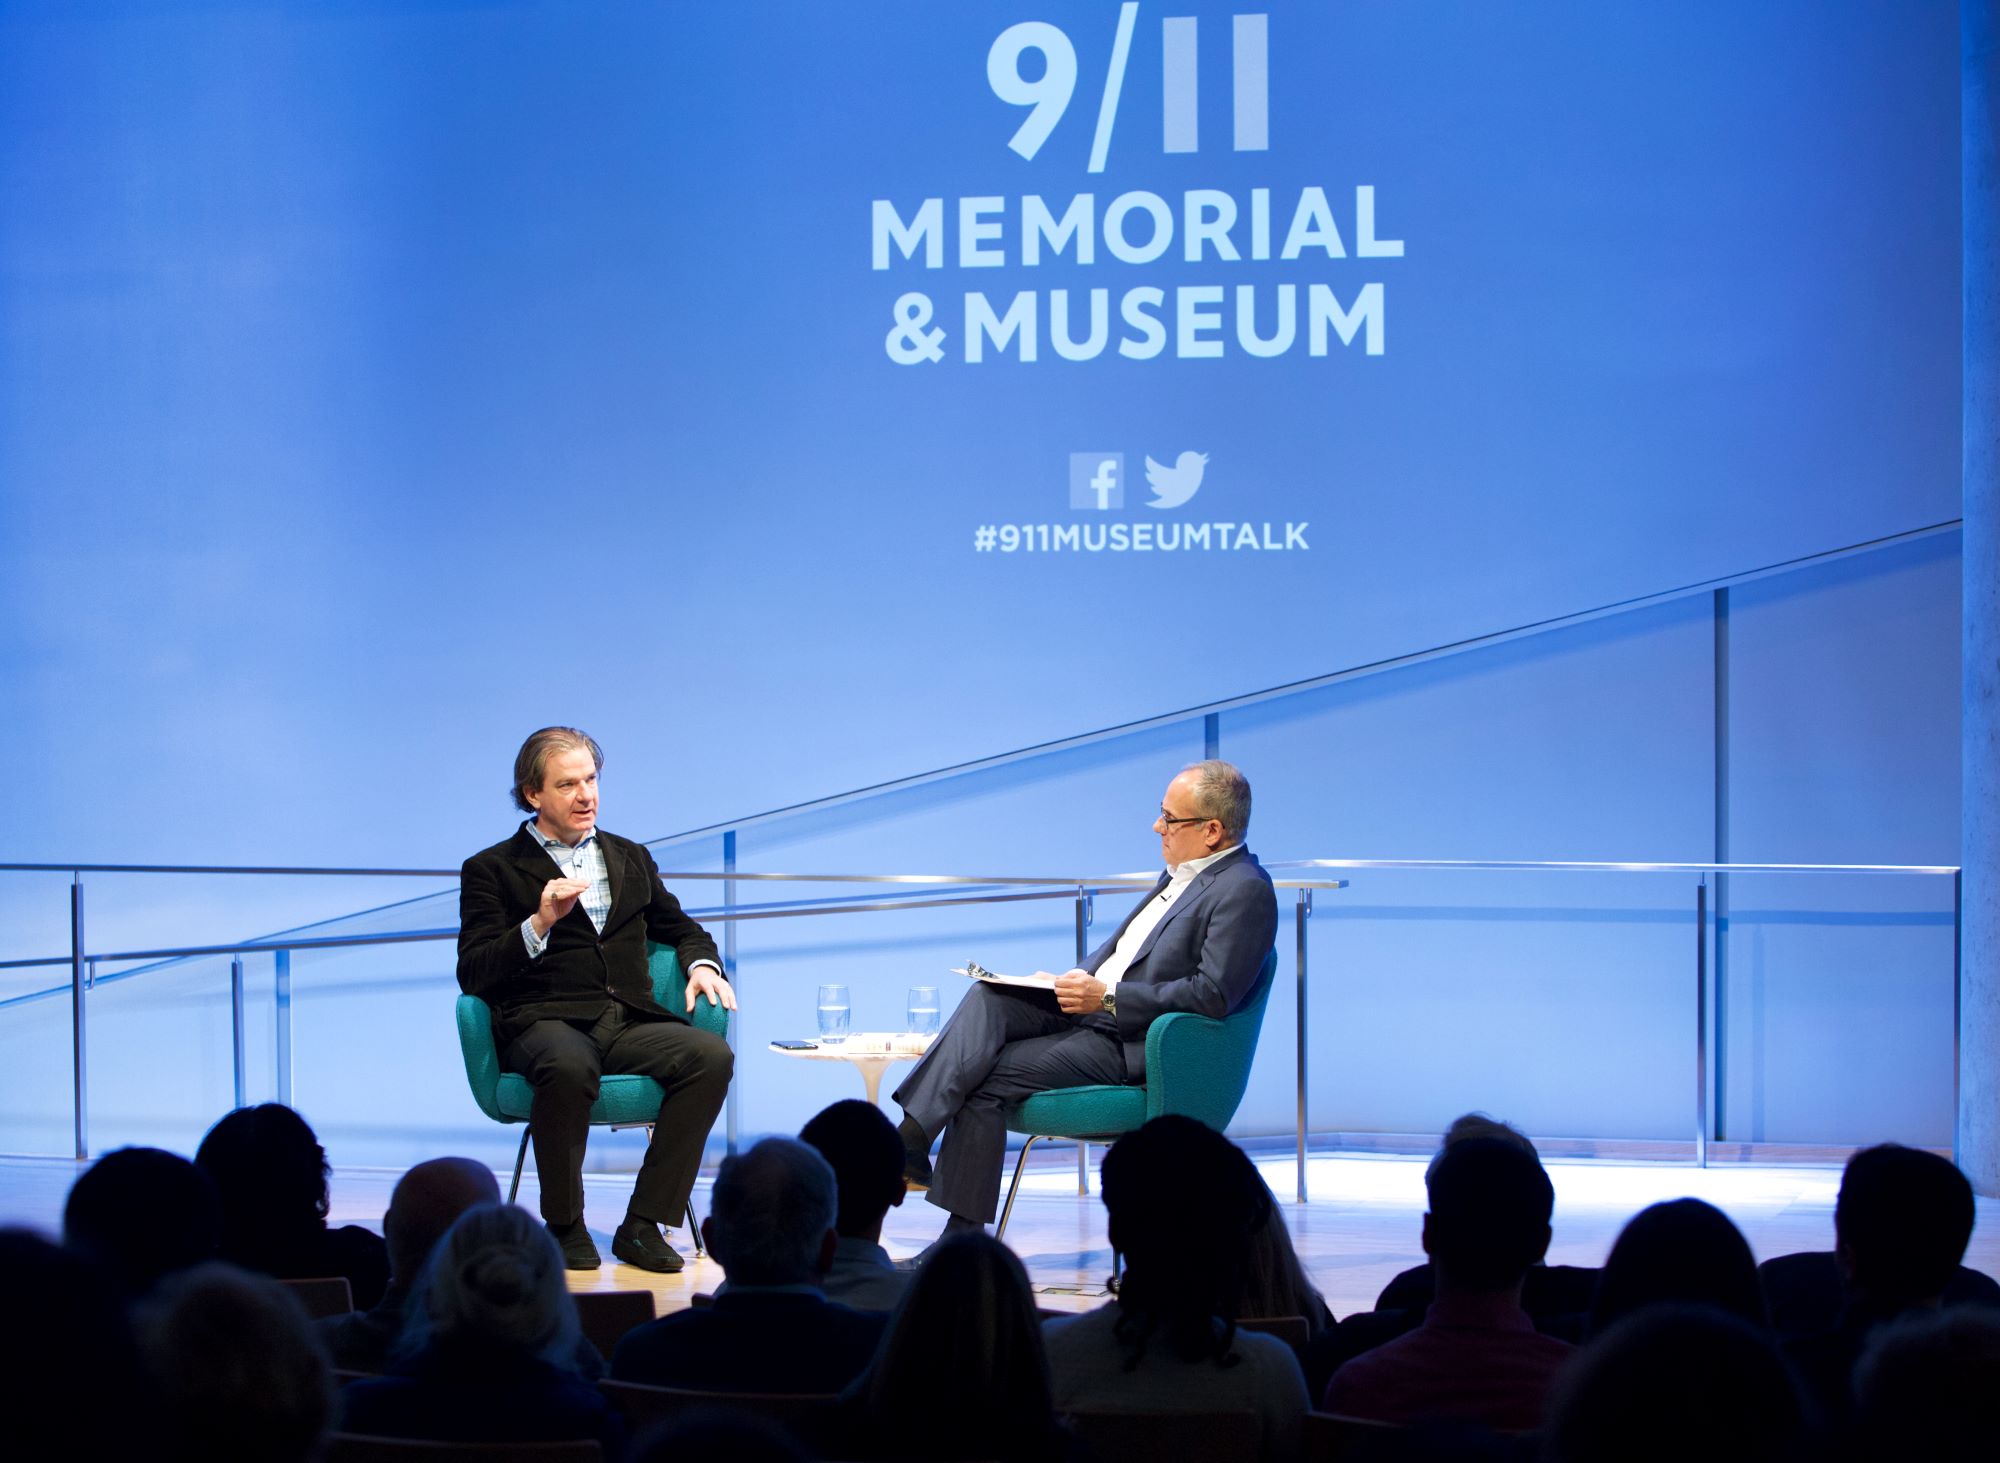 New York Times best-selling author and CNN National Security Analyst Peter Bergen discusses his latest book with Clifford Chanin, the executive vice president and deputy director for museum programs. The two of them are seated onstage at the Museum Auditorium. Members of the audience are silhouetted in the foreground. The 9/11 Memorial & Museum logo is projected on the wall above them.